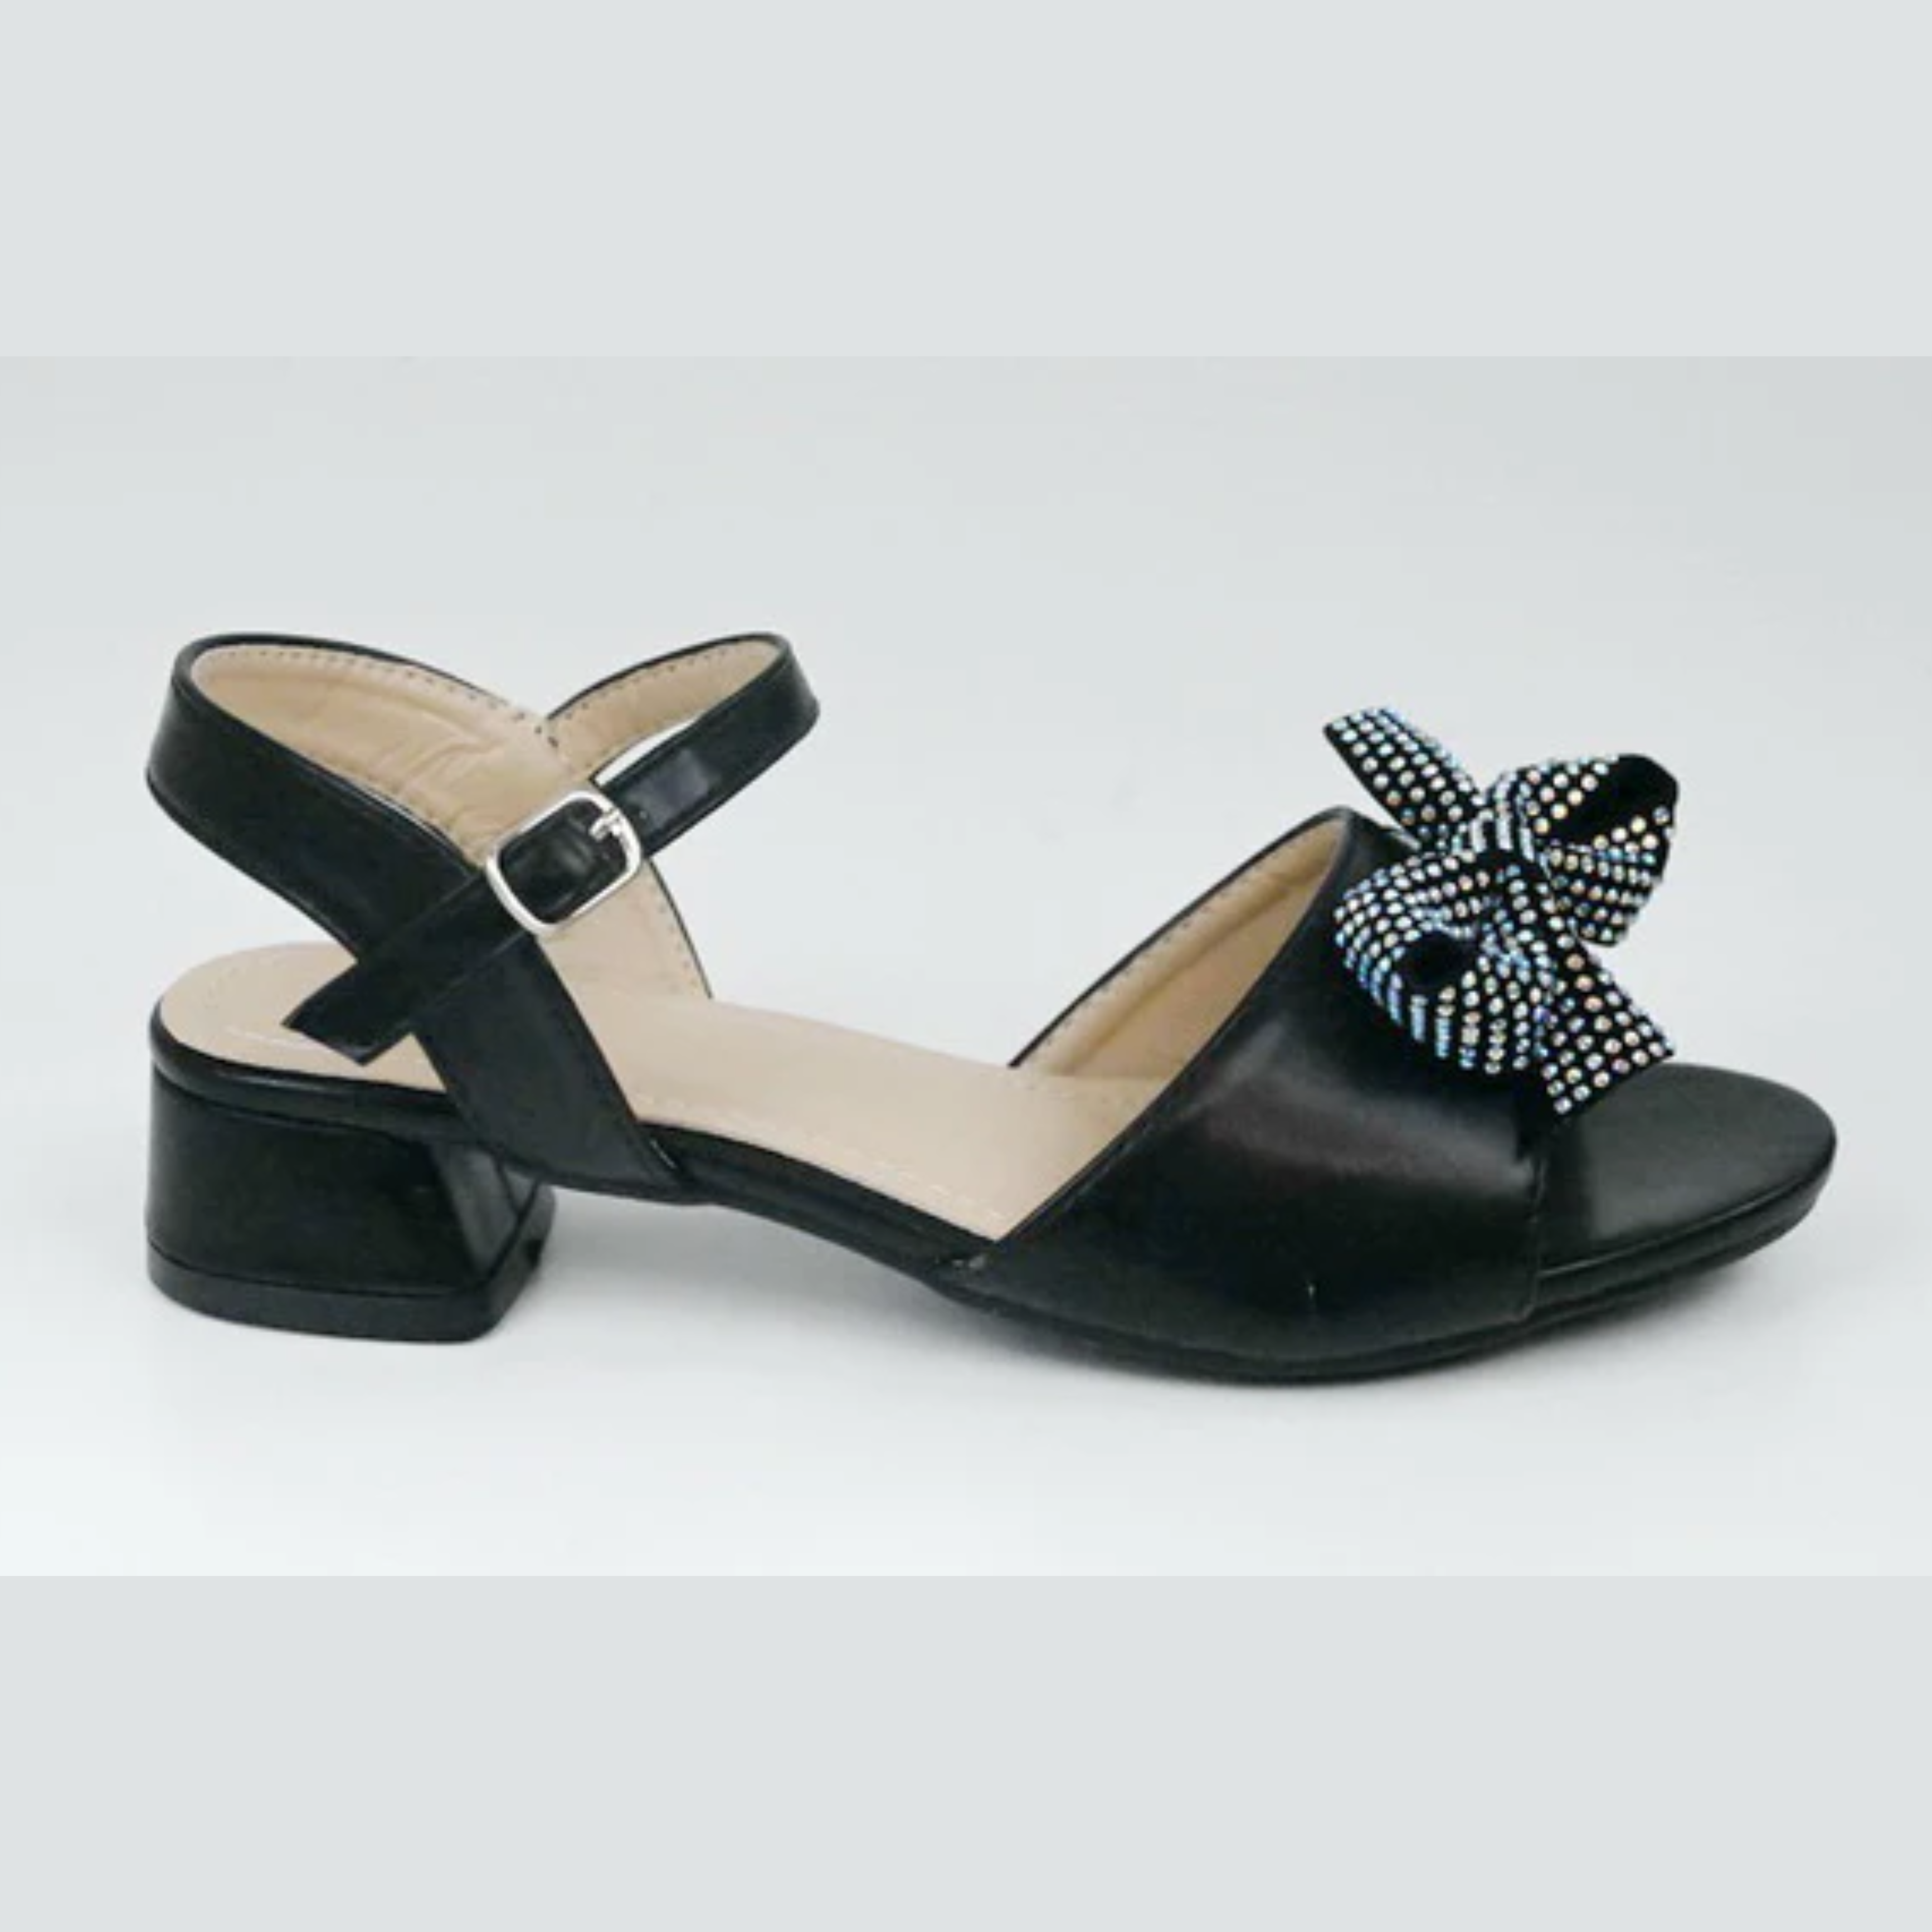 Faliza girls sandal with a bow